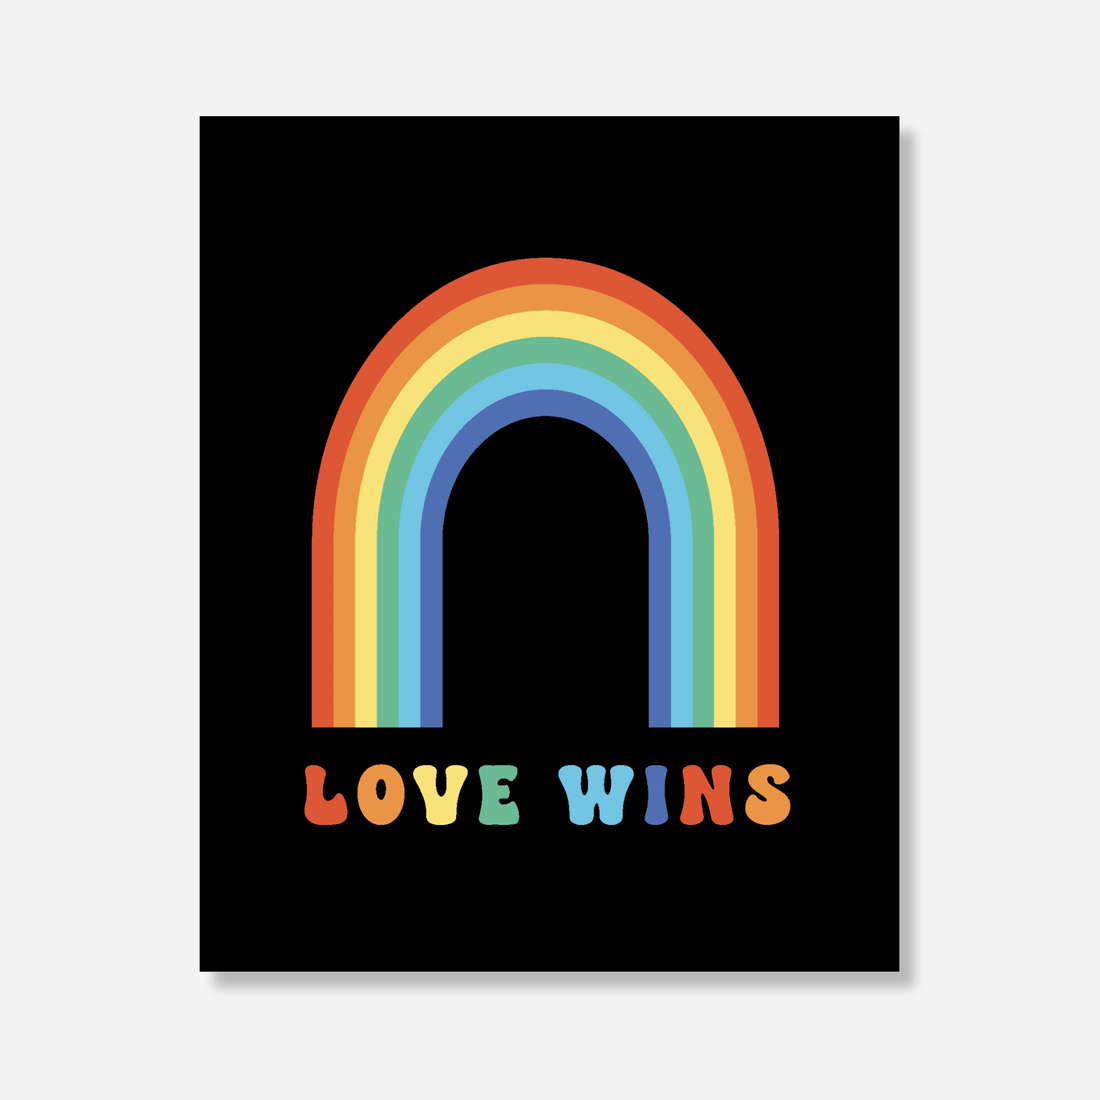 Love Wins greeting card with a vibrant rainbow heart, eco-friendly and printed on recycled paper, for a sustainable show of LGBTQ+ pride